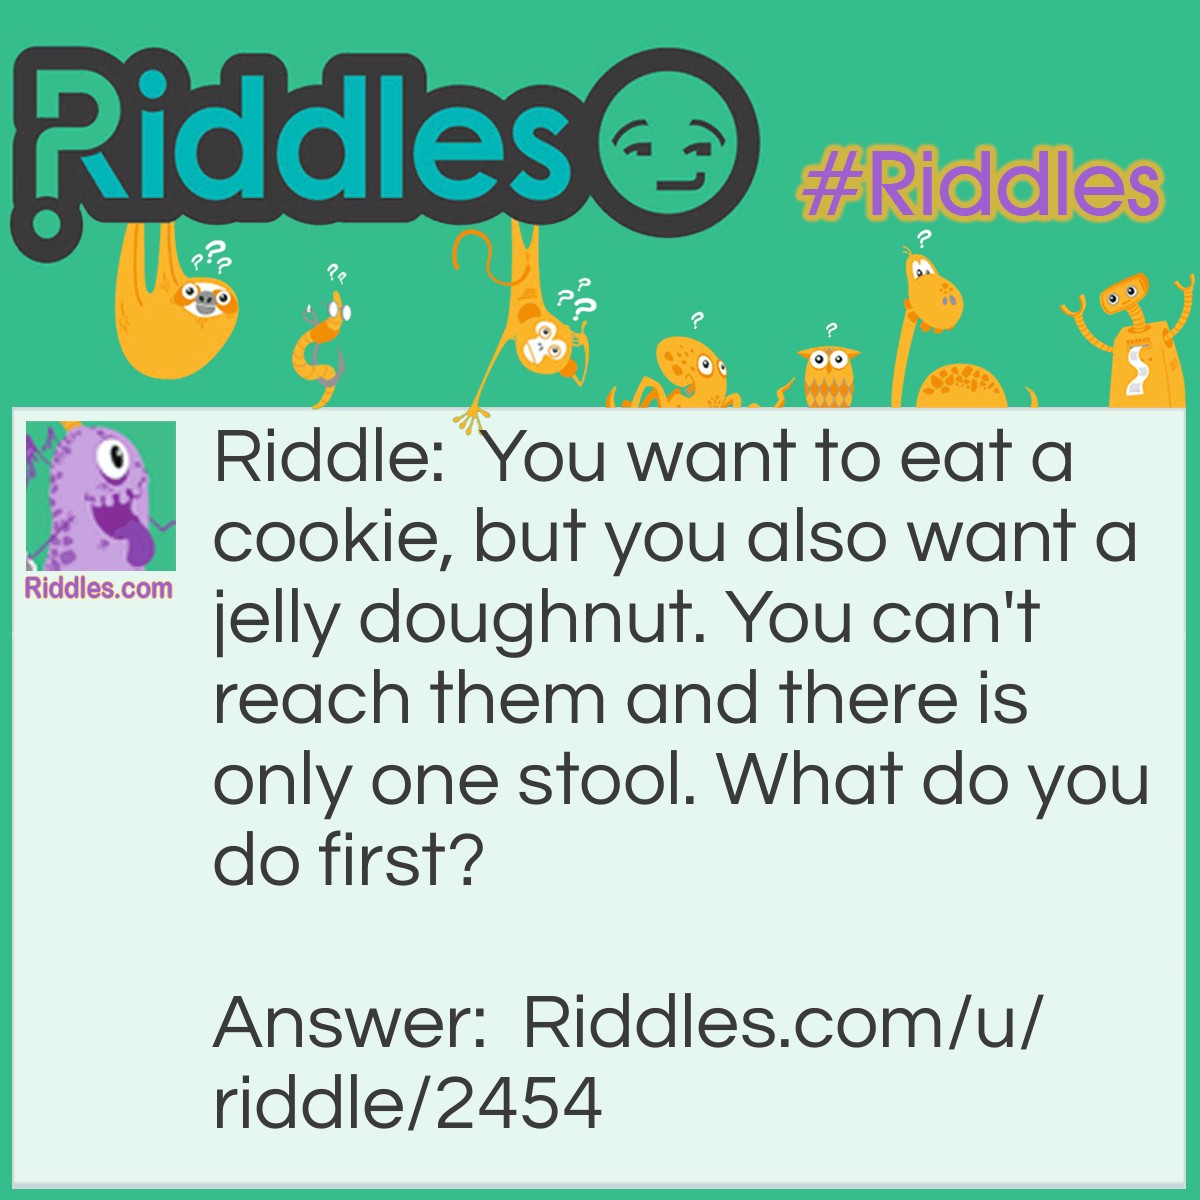 Riddle: You want to eat a cookie, but you also want a jelly doughnut. You can't reach them and there is only one stool. What do you do first? Answer: You move the stool to what you wanna eat first.